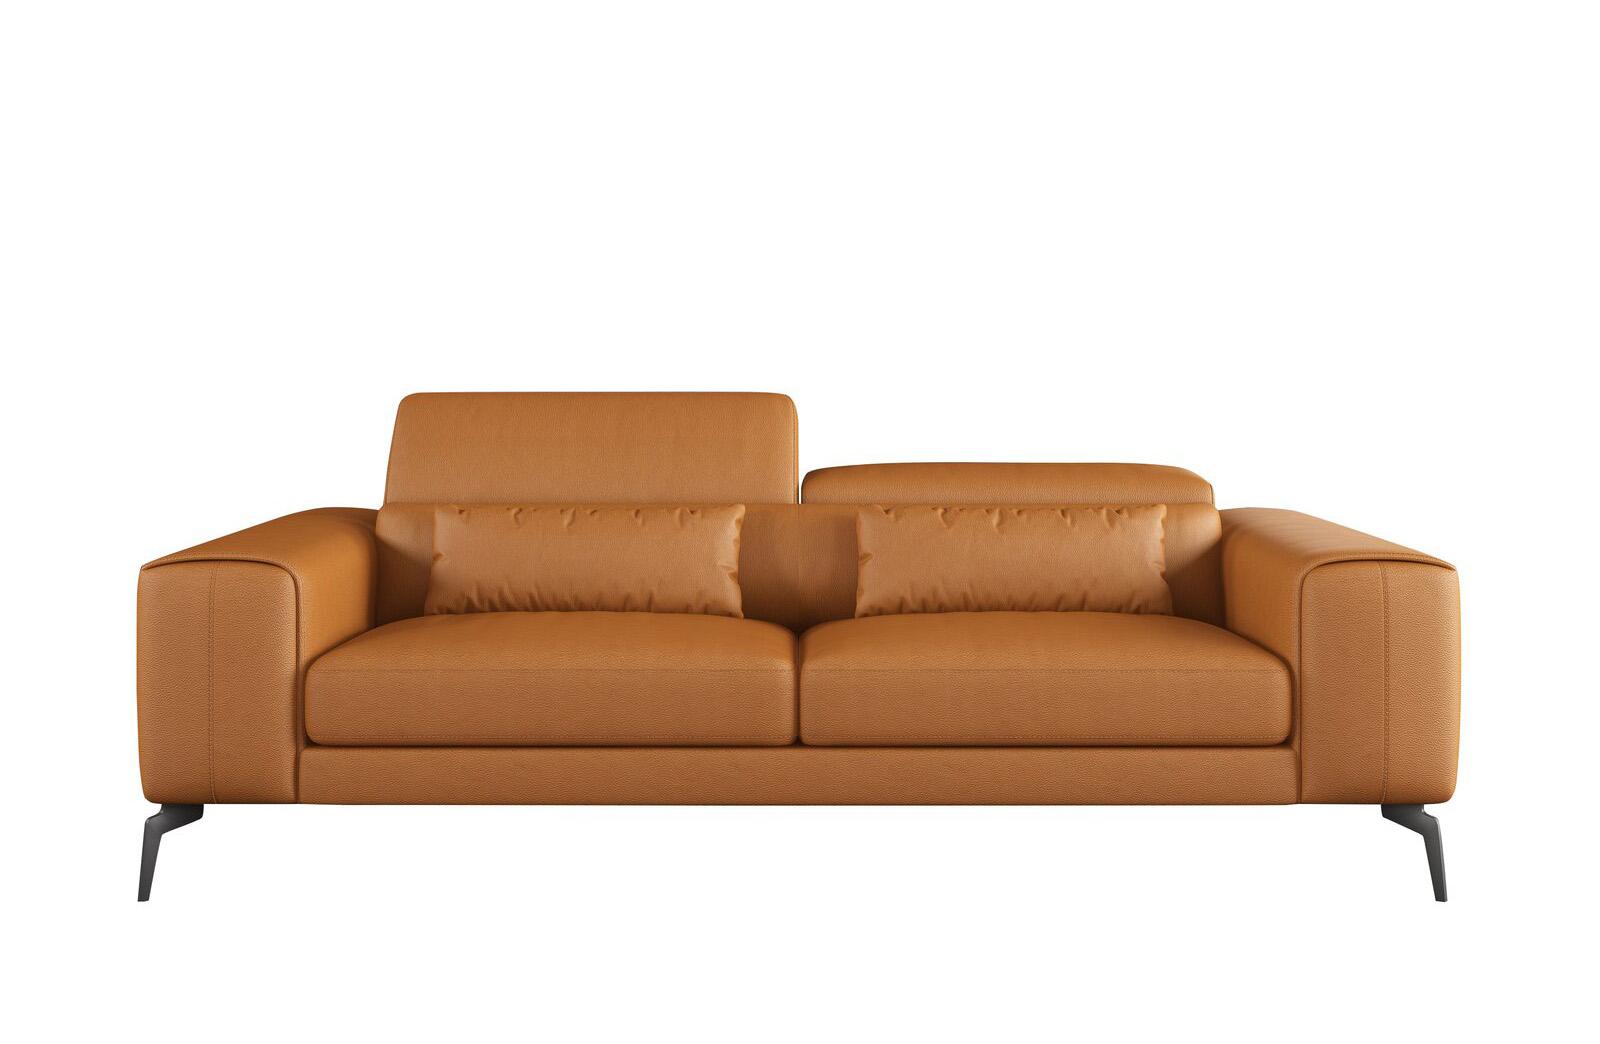 Contemporary, Modern Sofa CAVOUR EF-12551-S in Cognac Leather